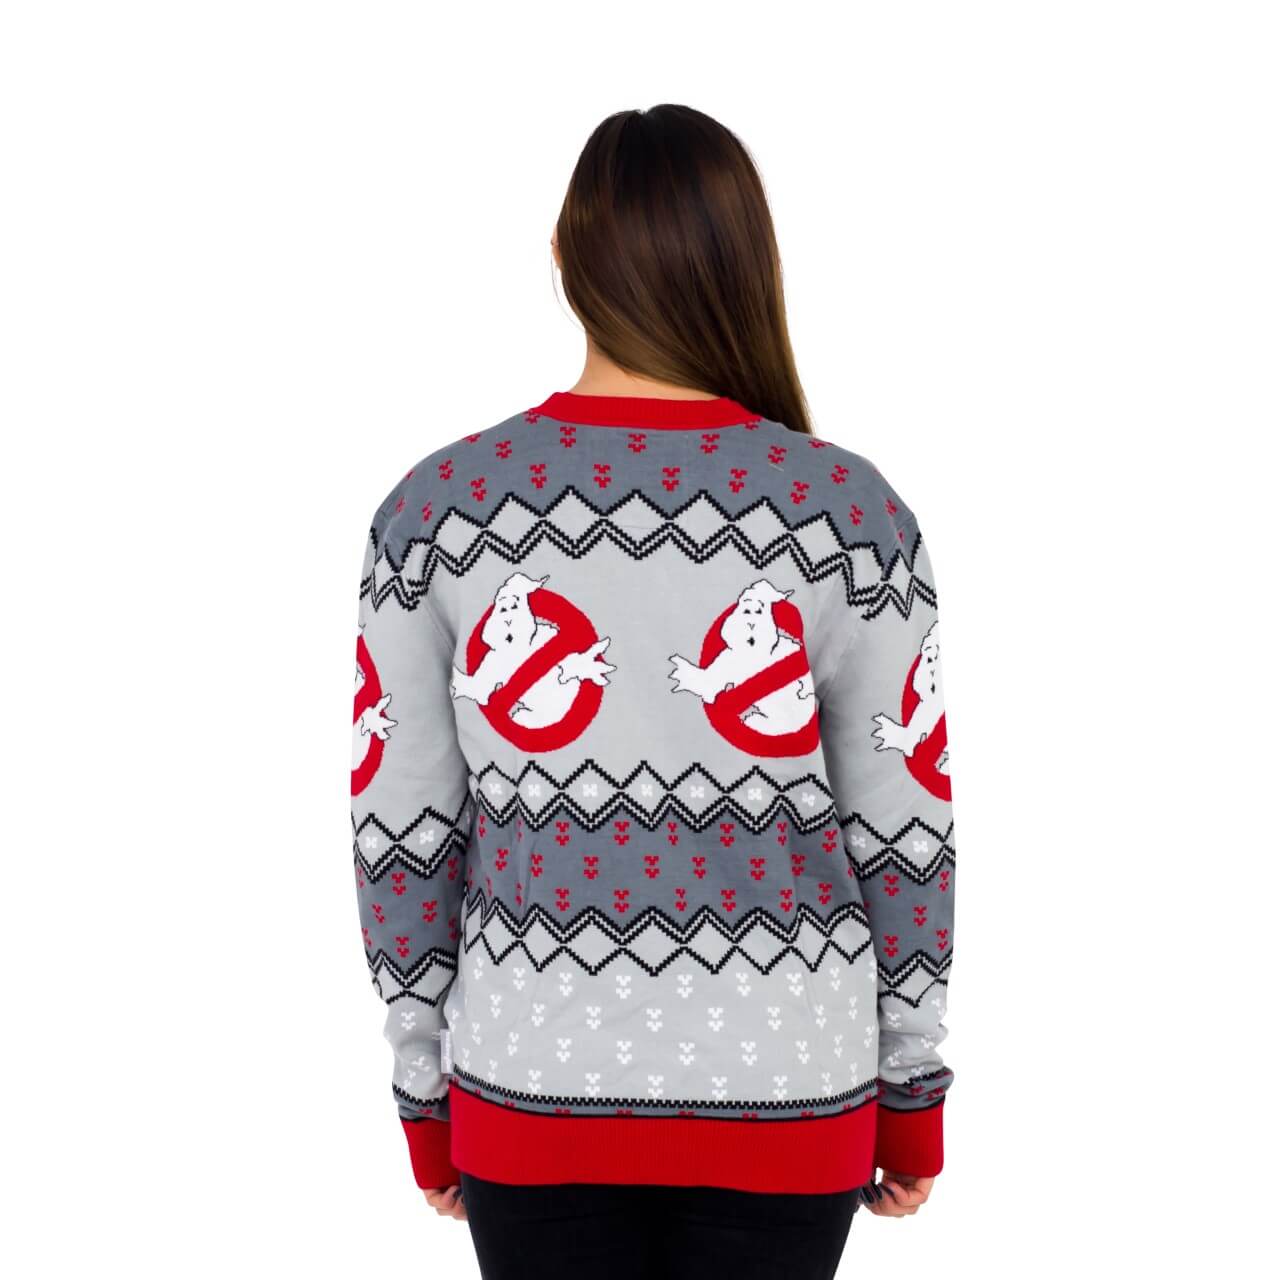 Women's Ghostbusters Logo Ugly Christmas Cardigan Sweater Back